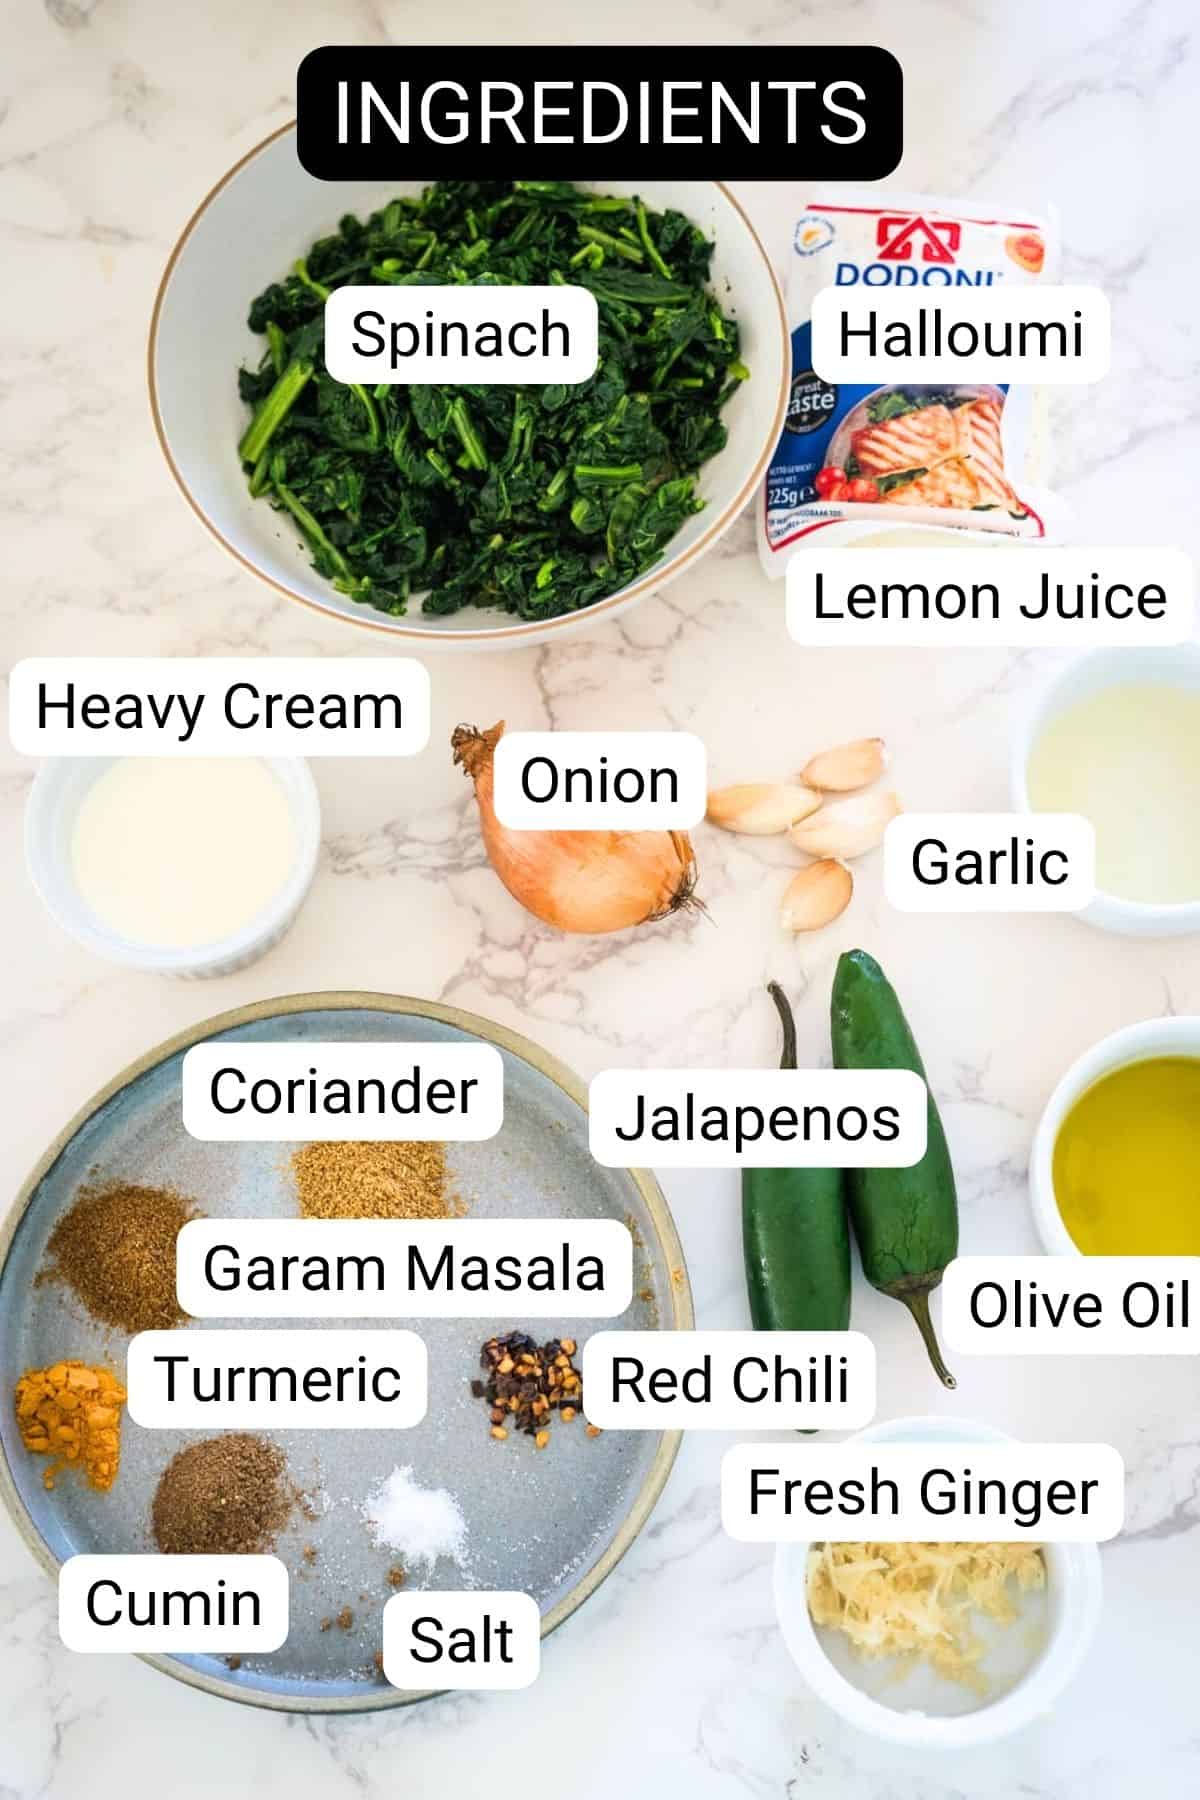 Ingredients for a recipe displayed on a marble countertop, including spinach, halloumi cheese, and various spices and condiments.